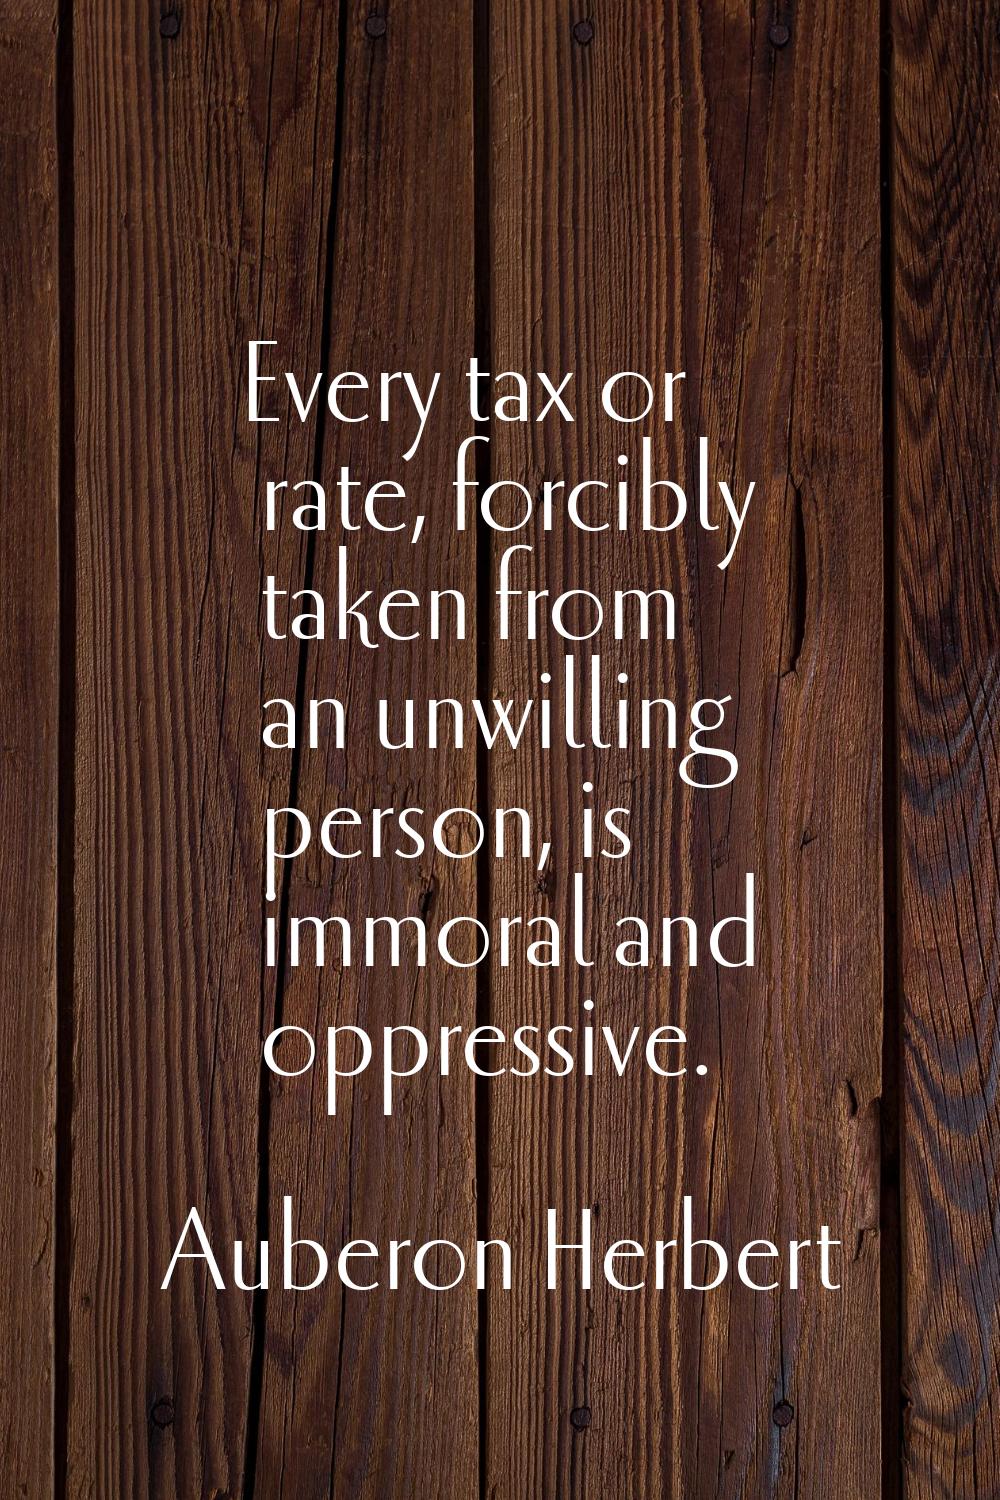 Every tax or rate, forcibly taken from an unwilling person, is immoral and oppressive.